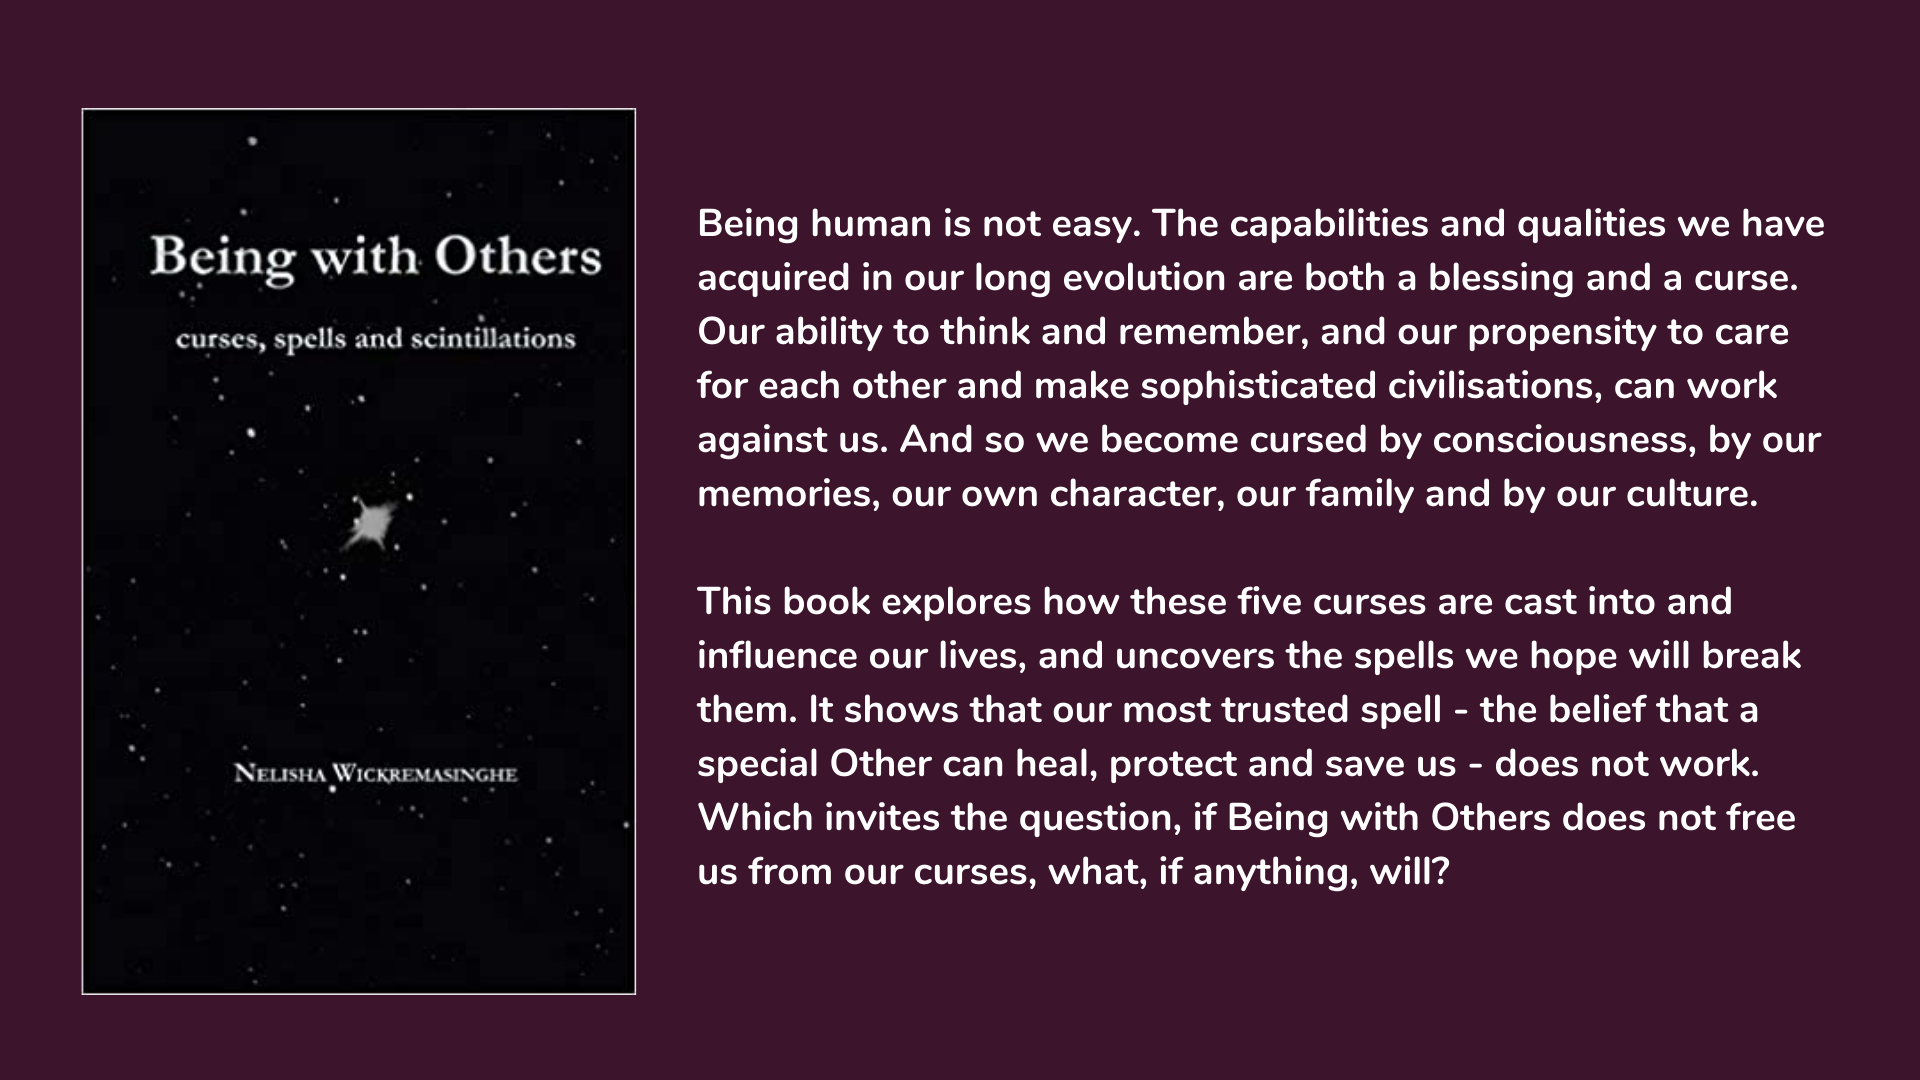 Being With Others: Curses, Spells And Scintillations, book cover and description.